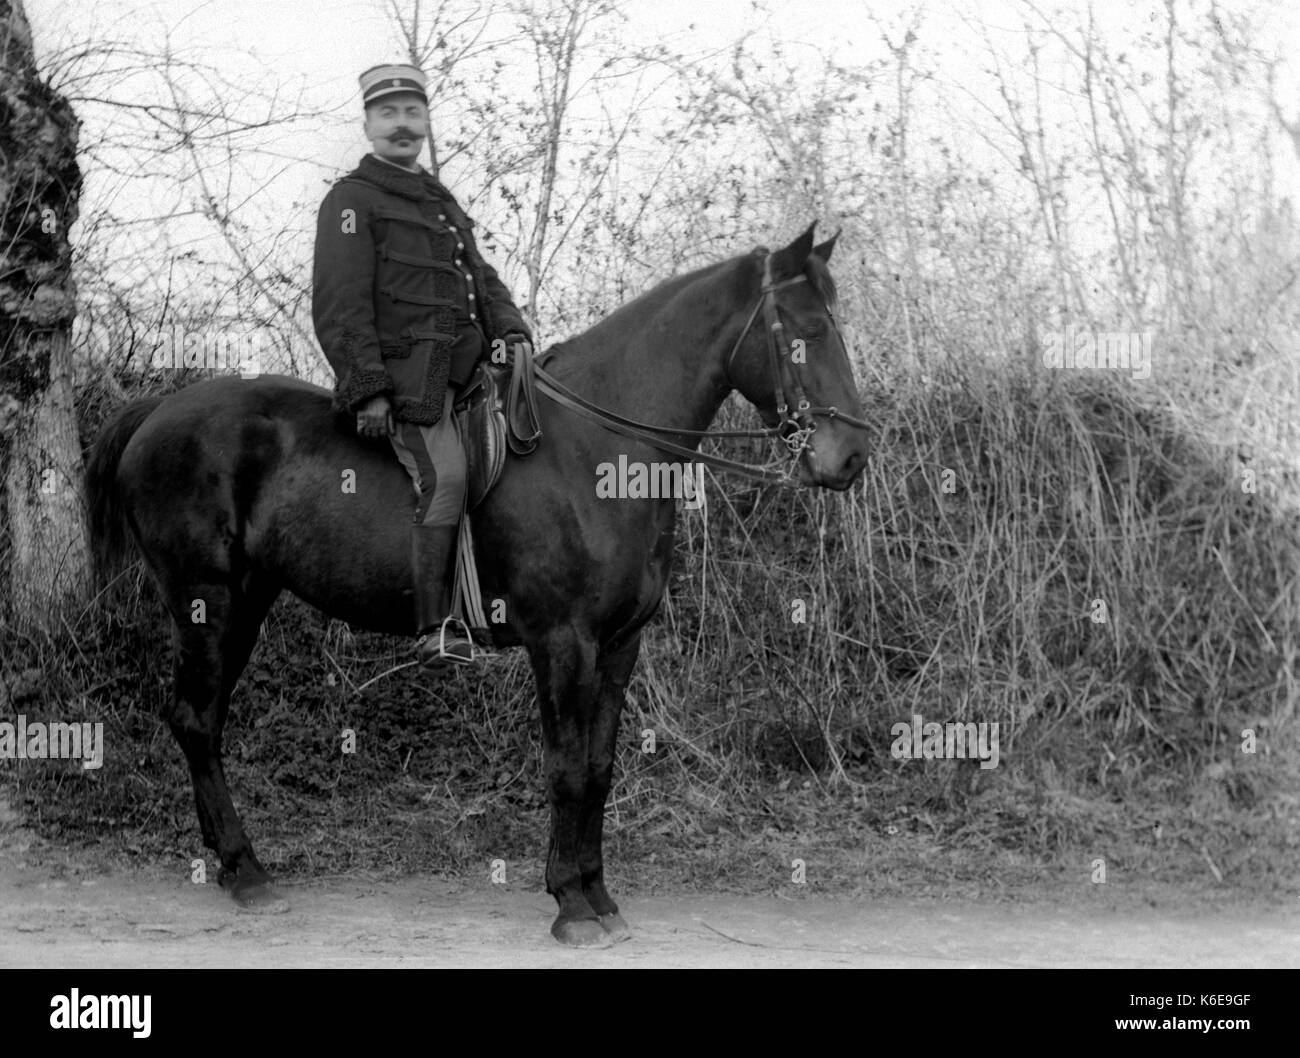 AJAXNETPHOTO. 1891-1910 (APPROX). SAINT-LO REGION, NORMANDY.FRANCE. - MAN ON HORSEBACK DRESSED IN FRENCH ARMY UNIFORM DATING FROM THE 1870S FRANCO-PRUSSIAN WAR. PHOTOGRAPHER:UNKNOWN © DIGITAL IMAGE COPYRIGHT AJAX VINTAGE PICTURE LIBRARY SOURCE: AJAX VINTAGE PICTURE LIBRARY COLLECTION REF:AVL FRA 1890 B29X1217 Stock Photo